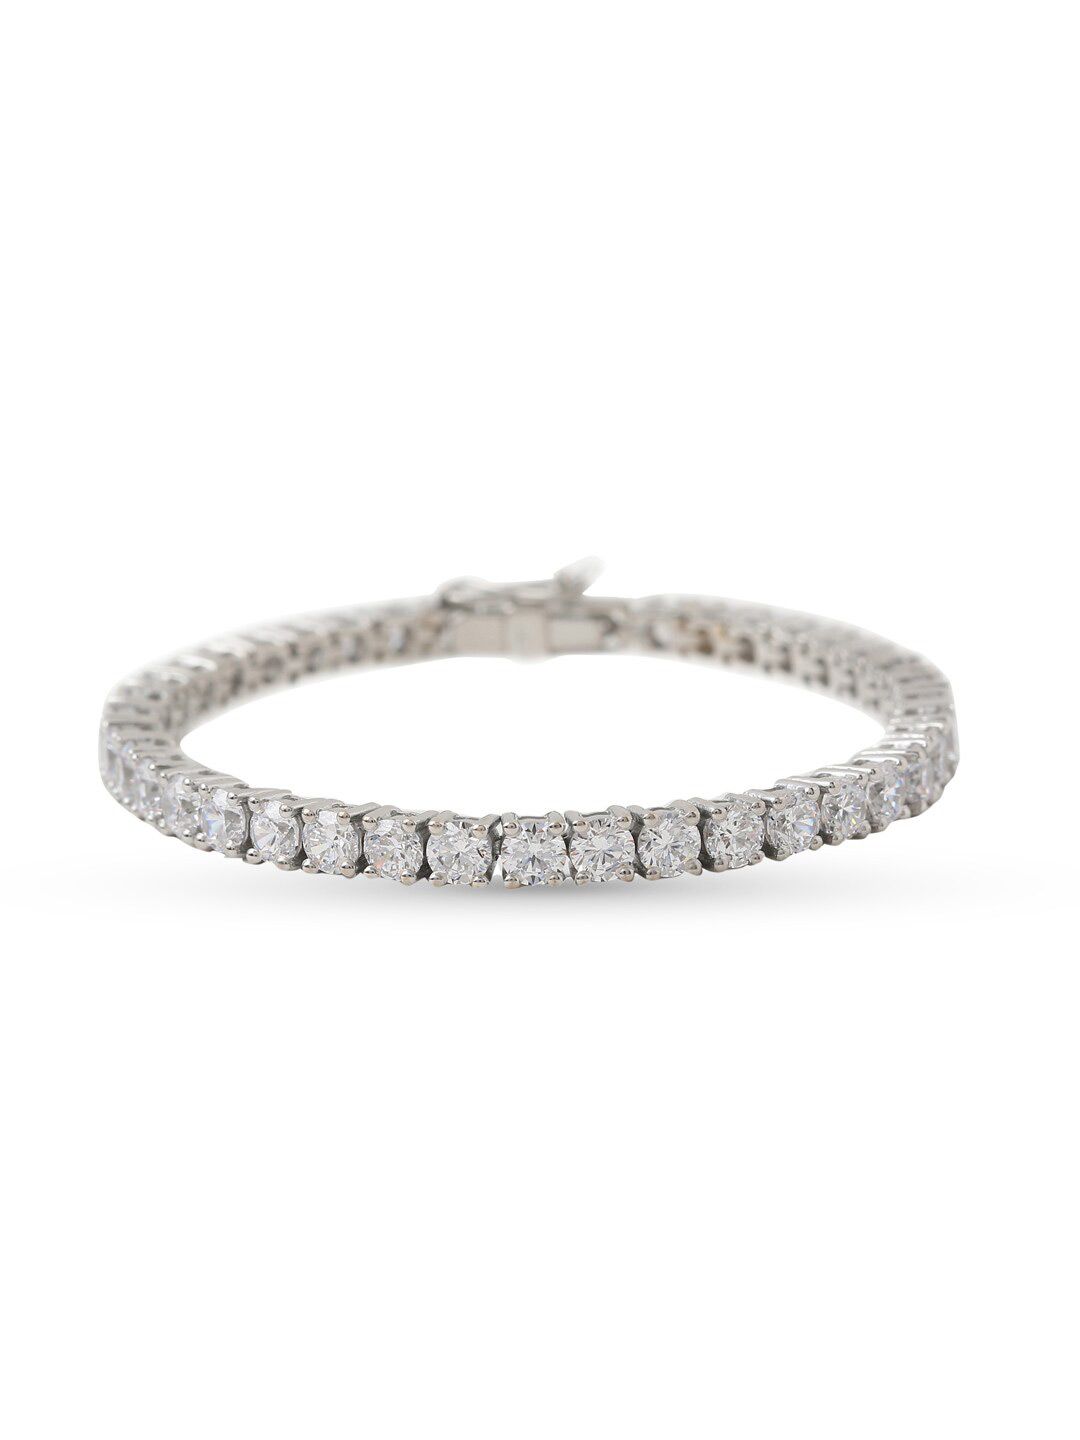 Hiara Jewels Women Silver-Toned Sterling Silver Cubic Zirconia Rhodium-Plated Bracelet Price in India